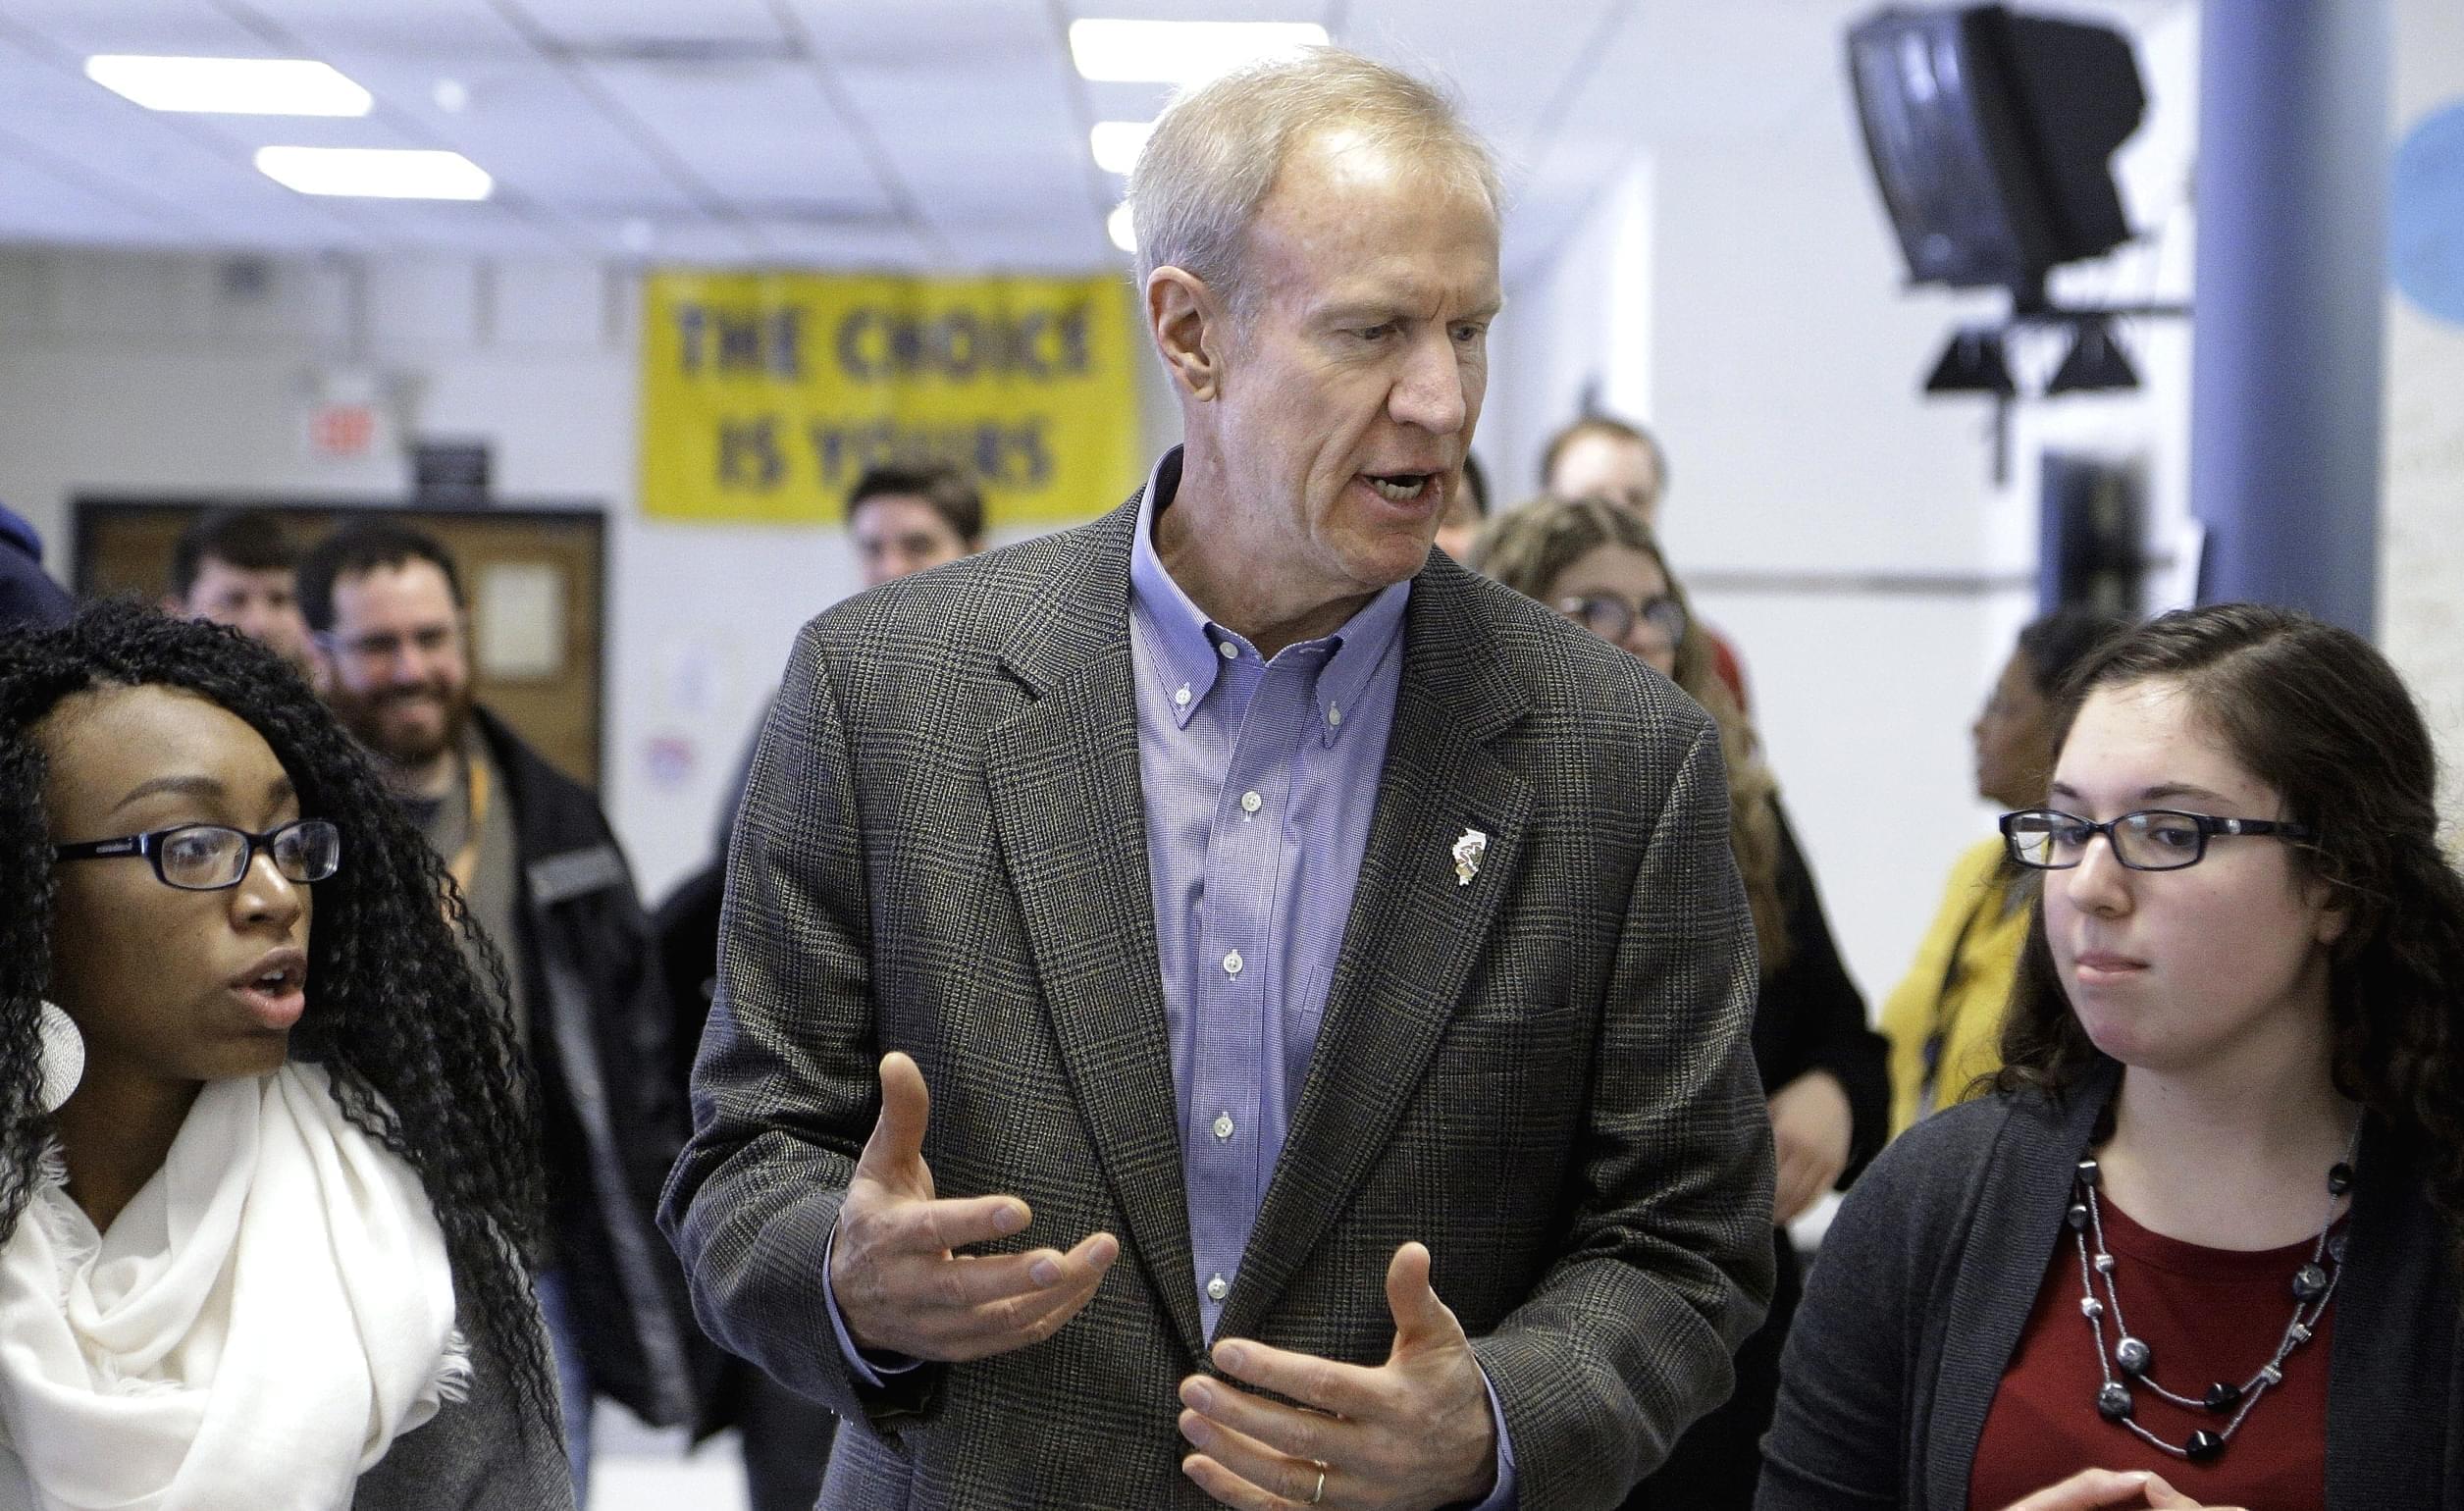 n this Feb. 24, 2016 photo, Illinois Gov. Bruce Rauner visits with students hoping to attend college during a visit to Southeast High School in Springfield, where he discussed his education agenda. 